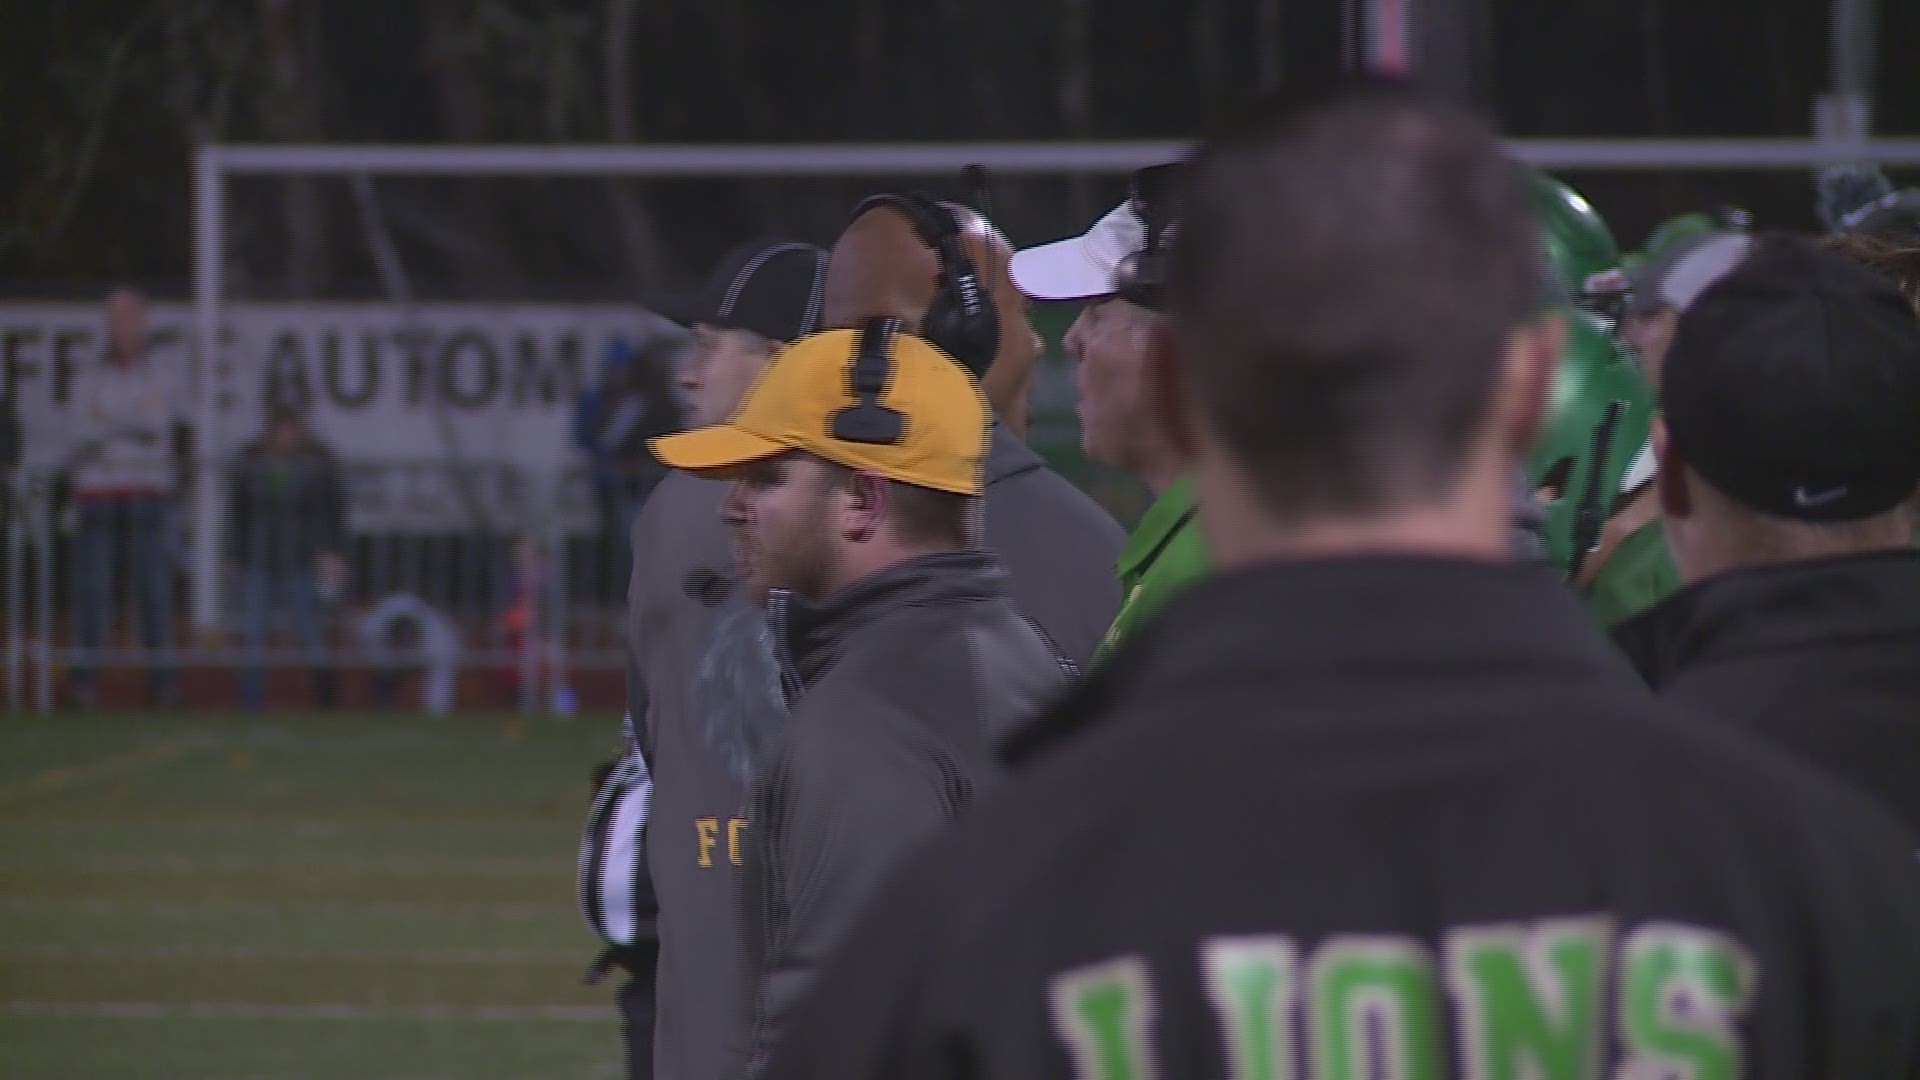 Highlights of West Linn's 35-14 win over Sherwood in the second round of the playoffs. Highlights are part of Friday Night Flights with Orlando Sanchez.